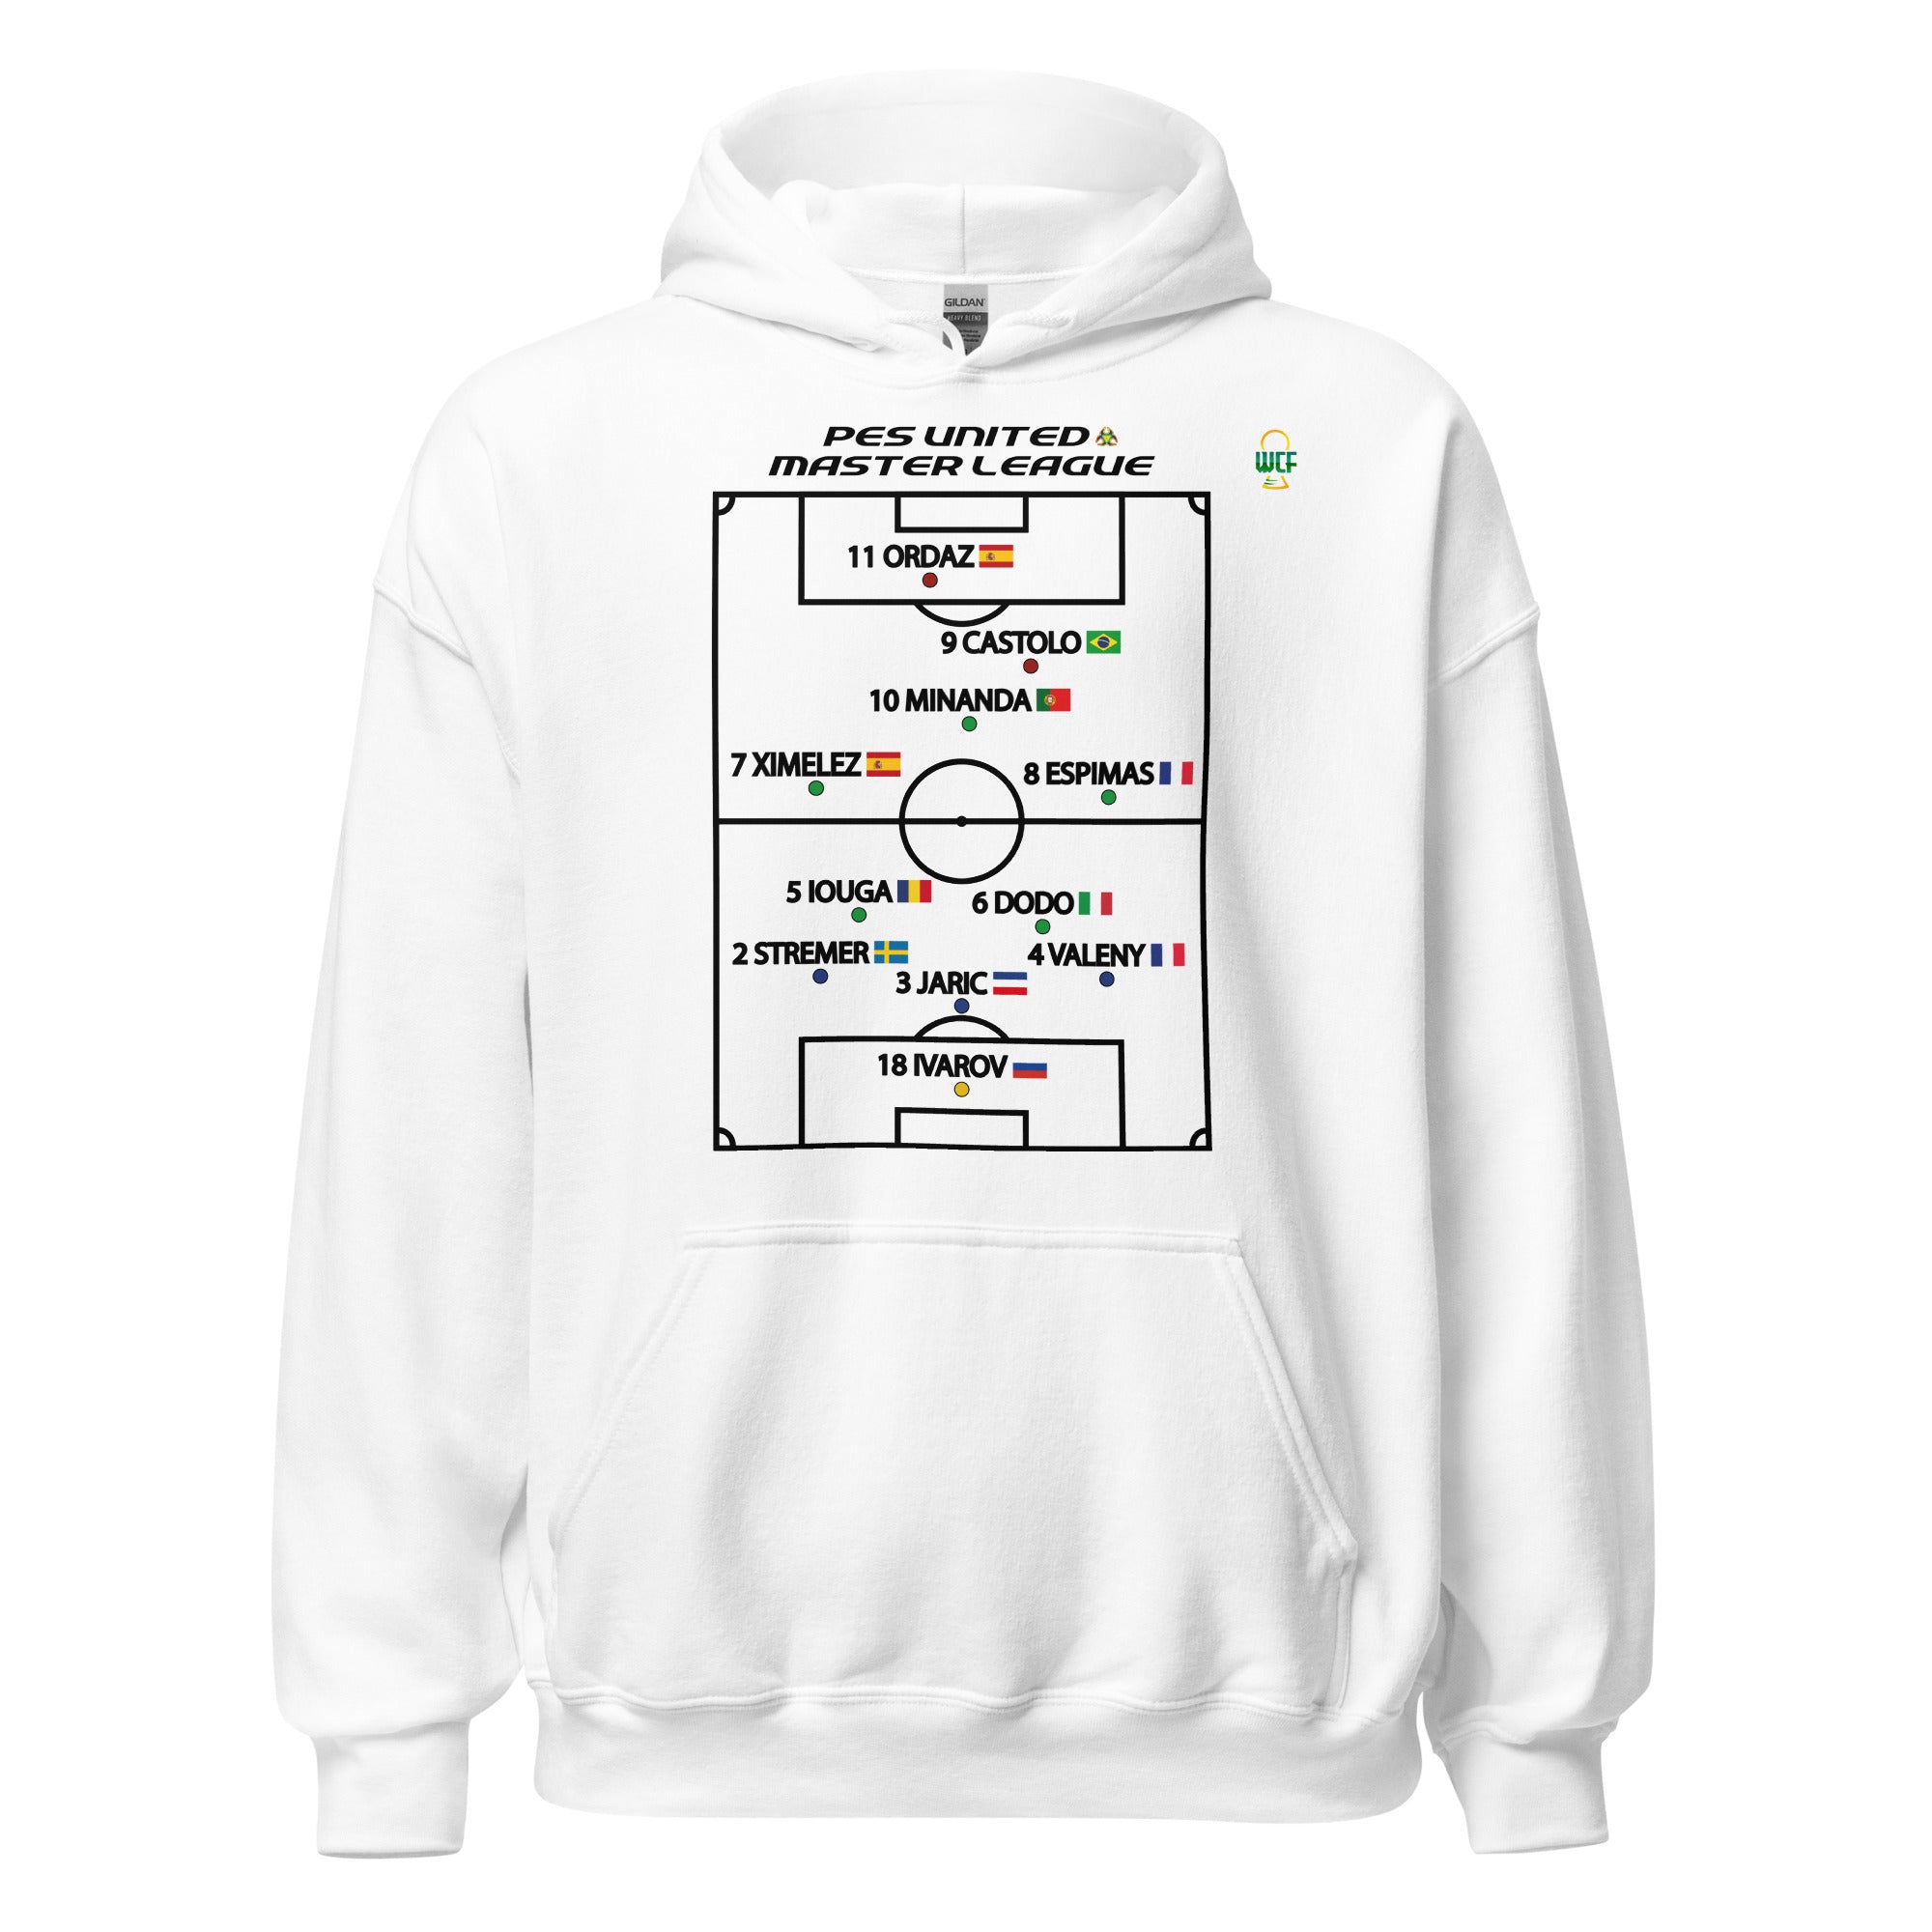 Pro Evolution Soccer Master League Lineup Hoodie - PES United